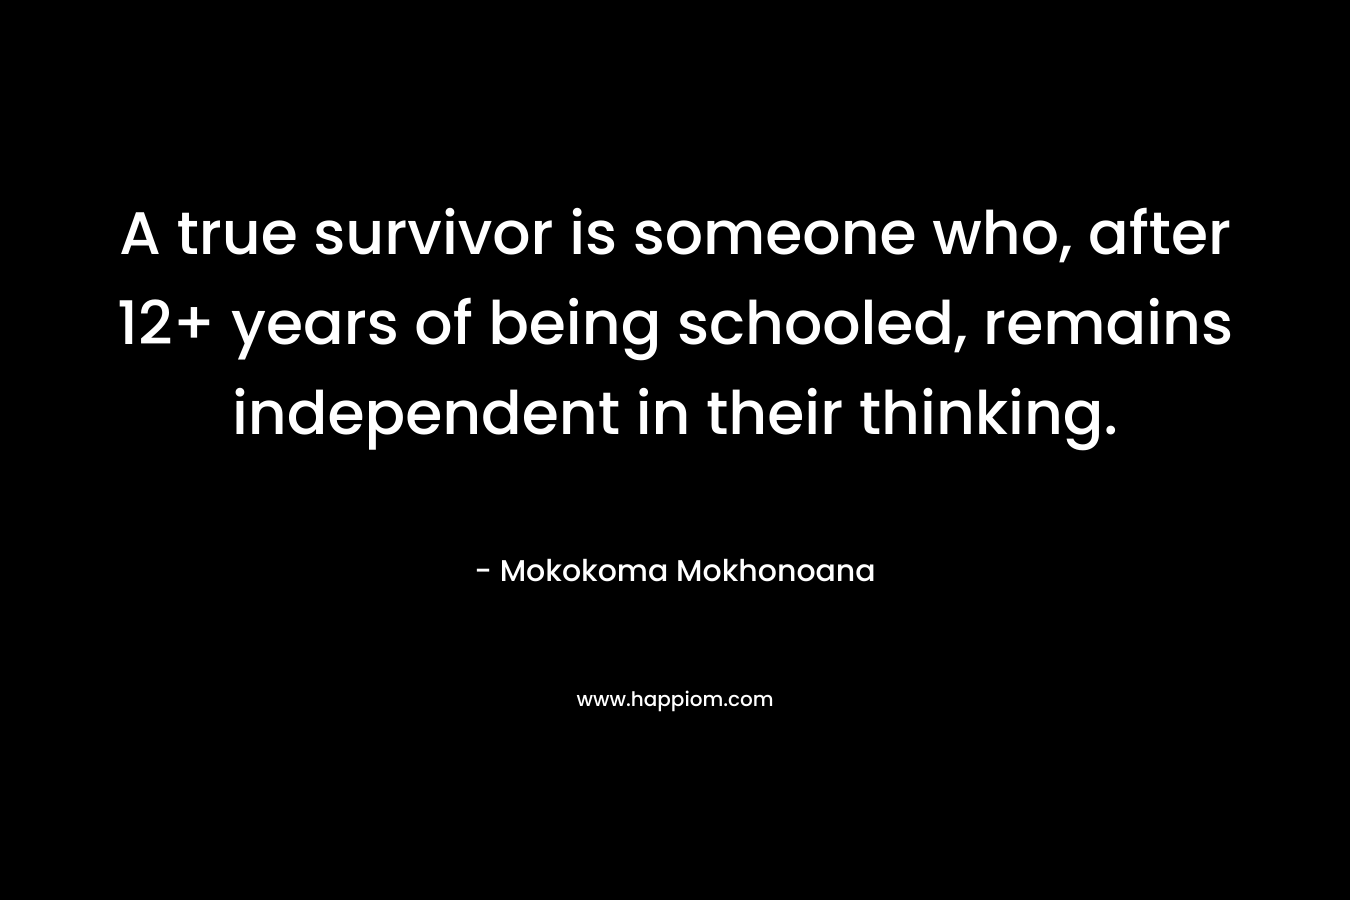 A true survivor is someone who, after 12+ years of being schooled, remains independent in their thinking. – Mokokoma Mokhonoana